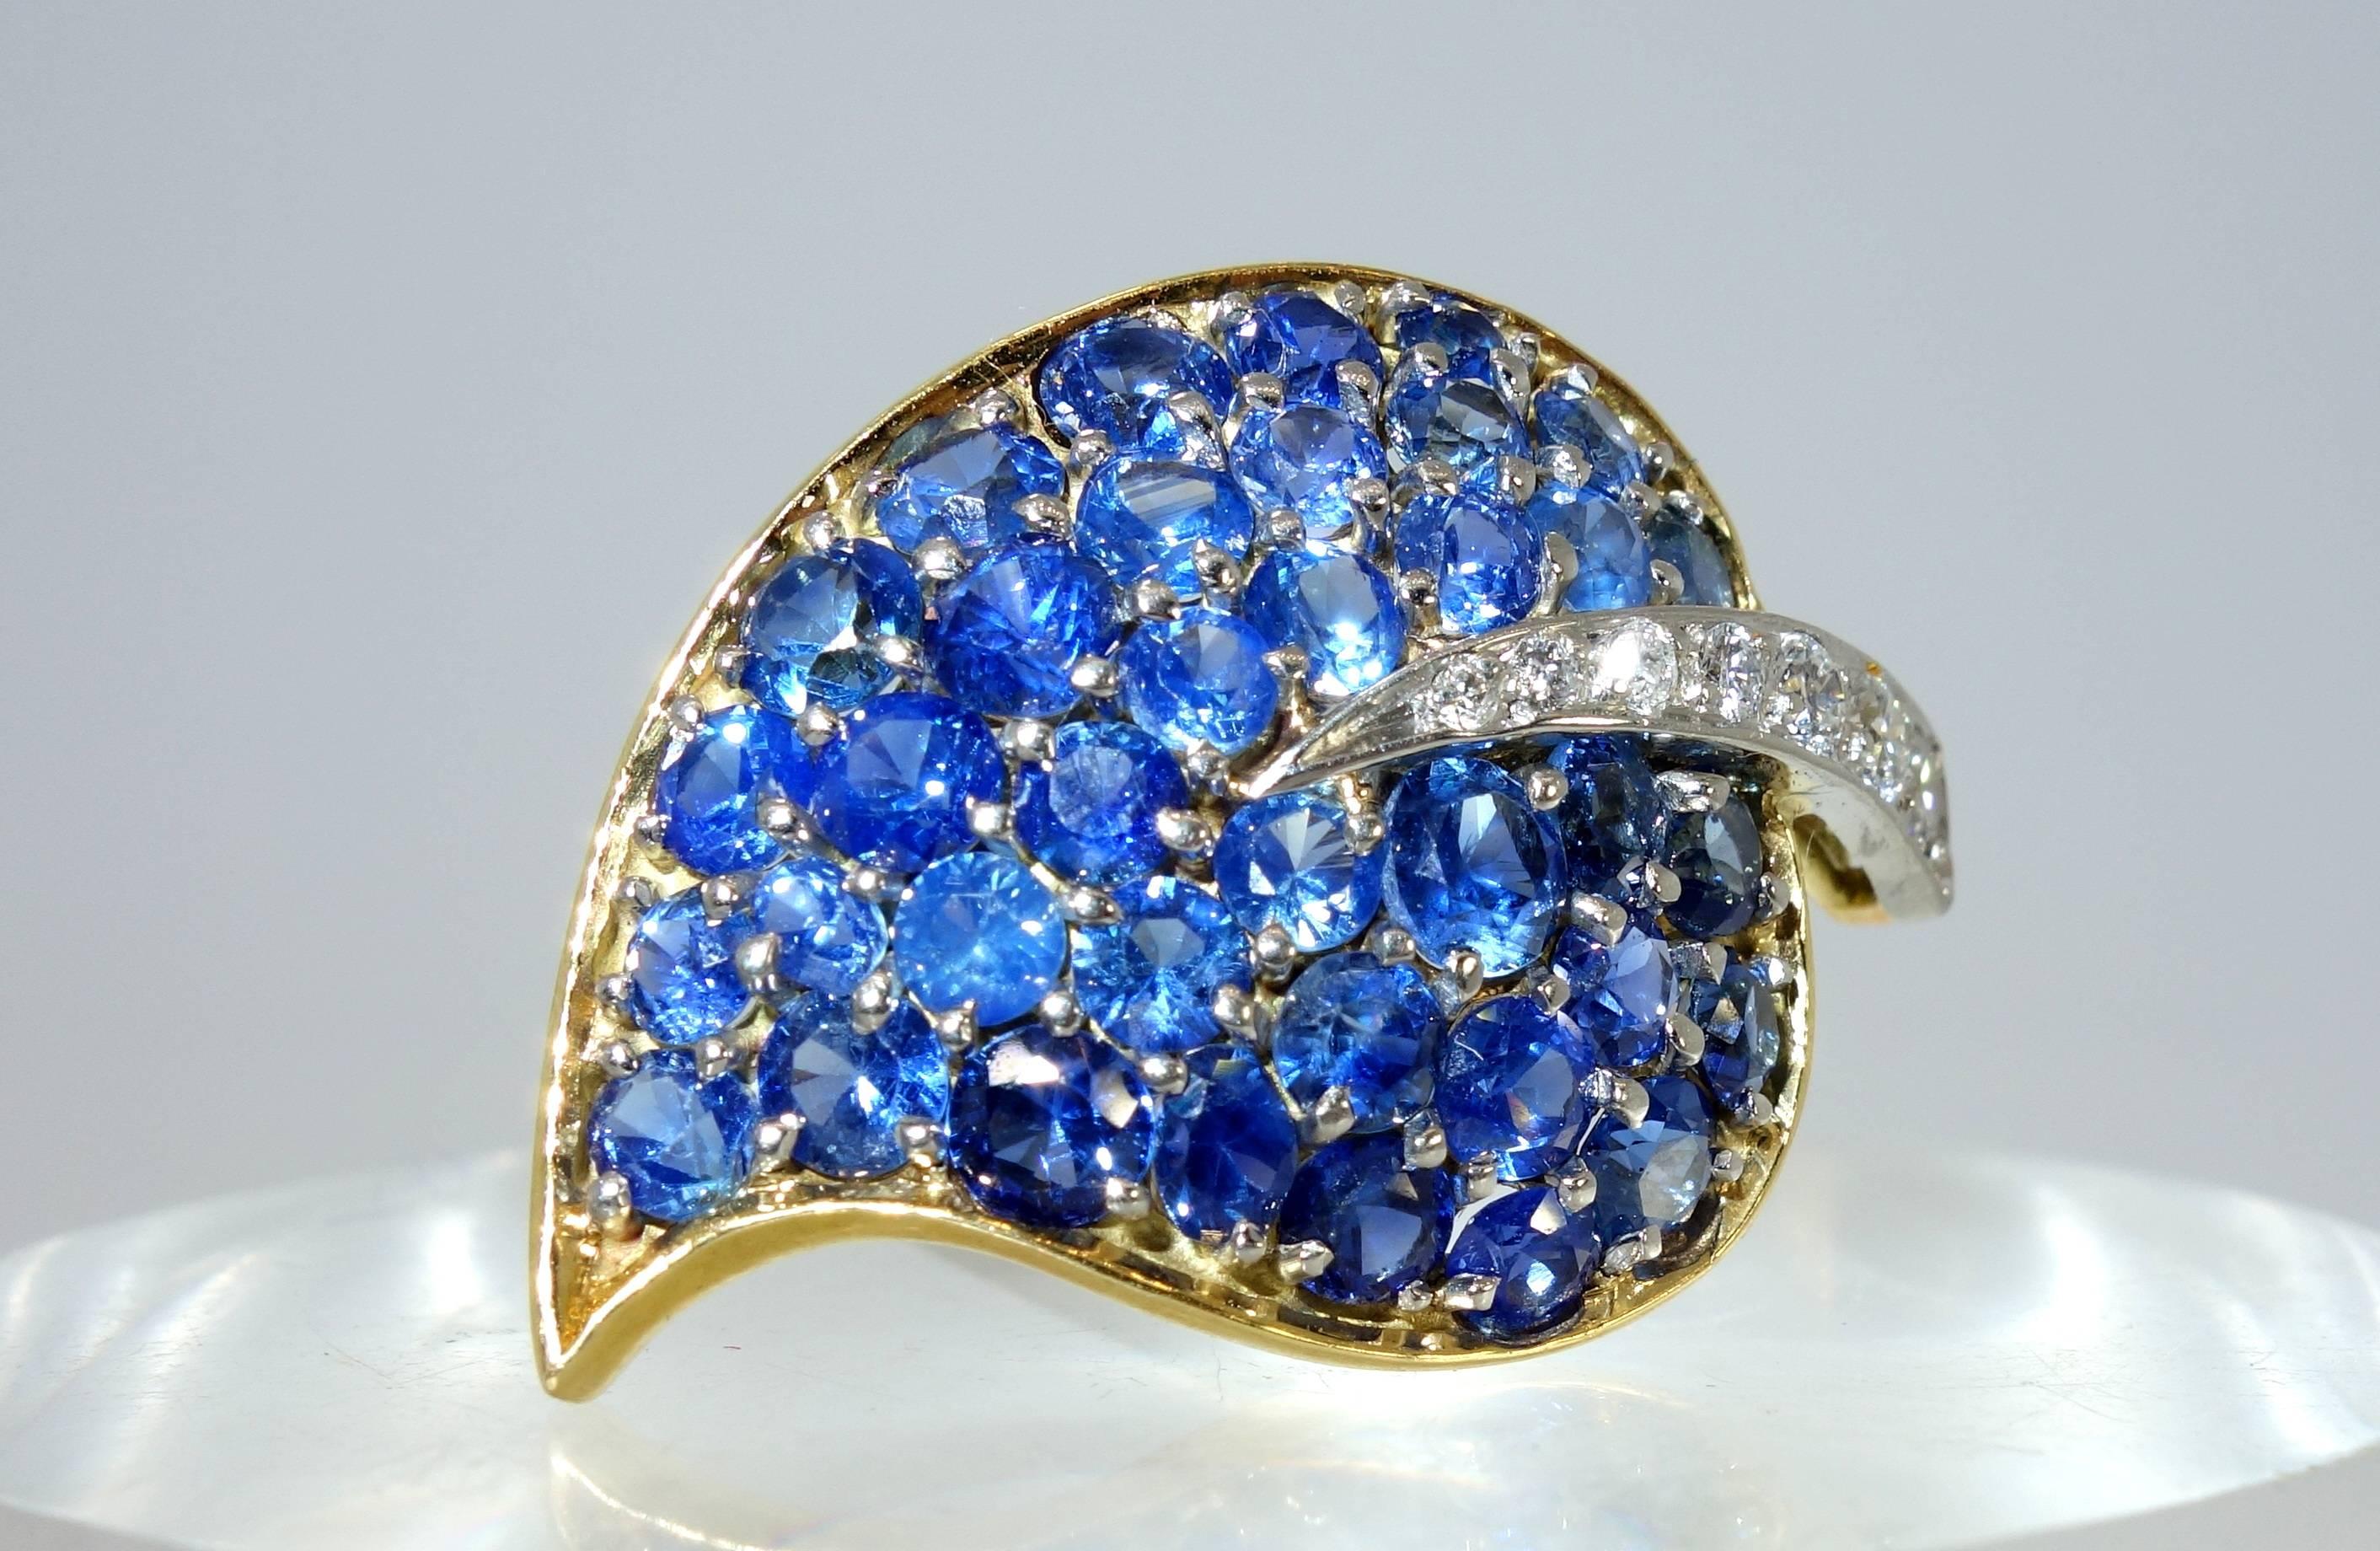 Circa 1960 with approximately 4.07 cts of bright blue sapphires and .27 cts of diamonds set in platinum.  This clip was made circa 1960 and is 1.25 inches long and .75 inches wide.  The clip is signed and numbered VC&A New York, No. 18605